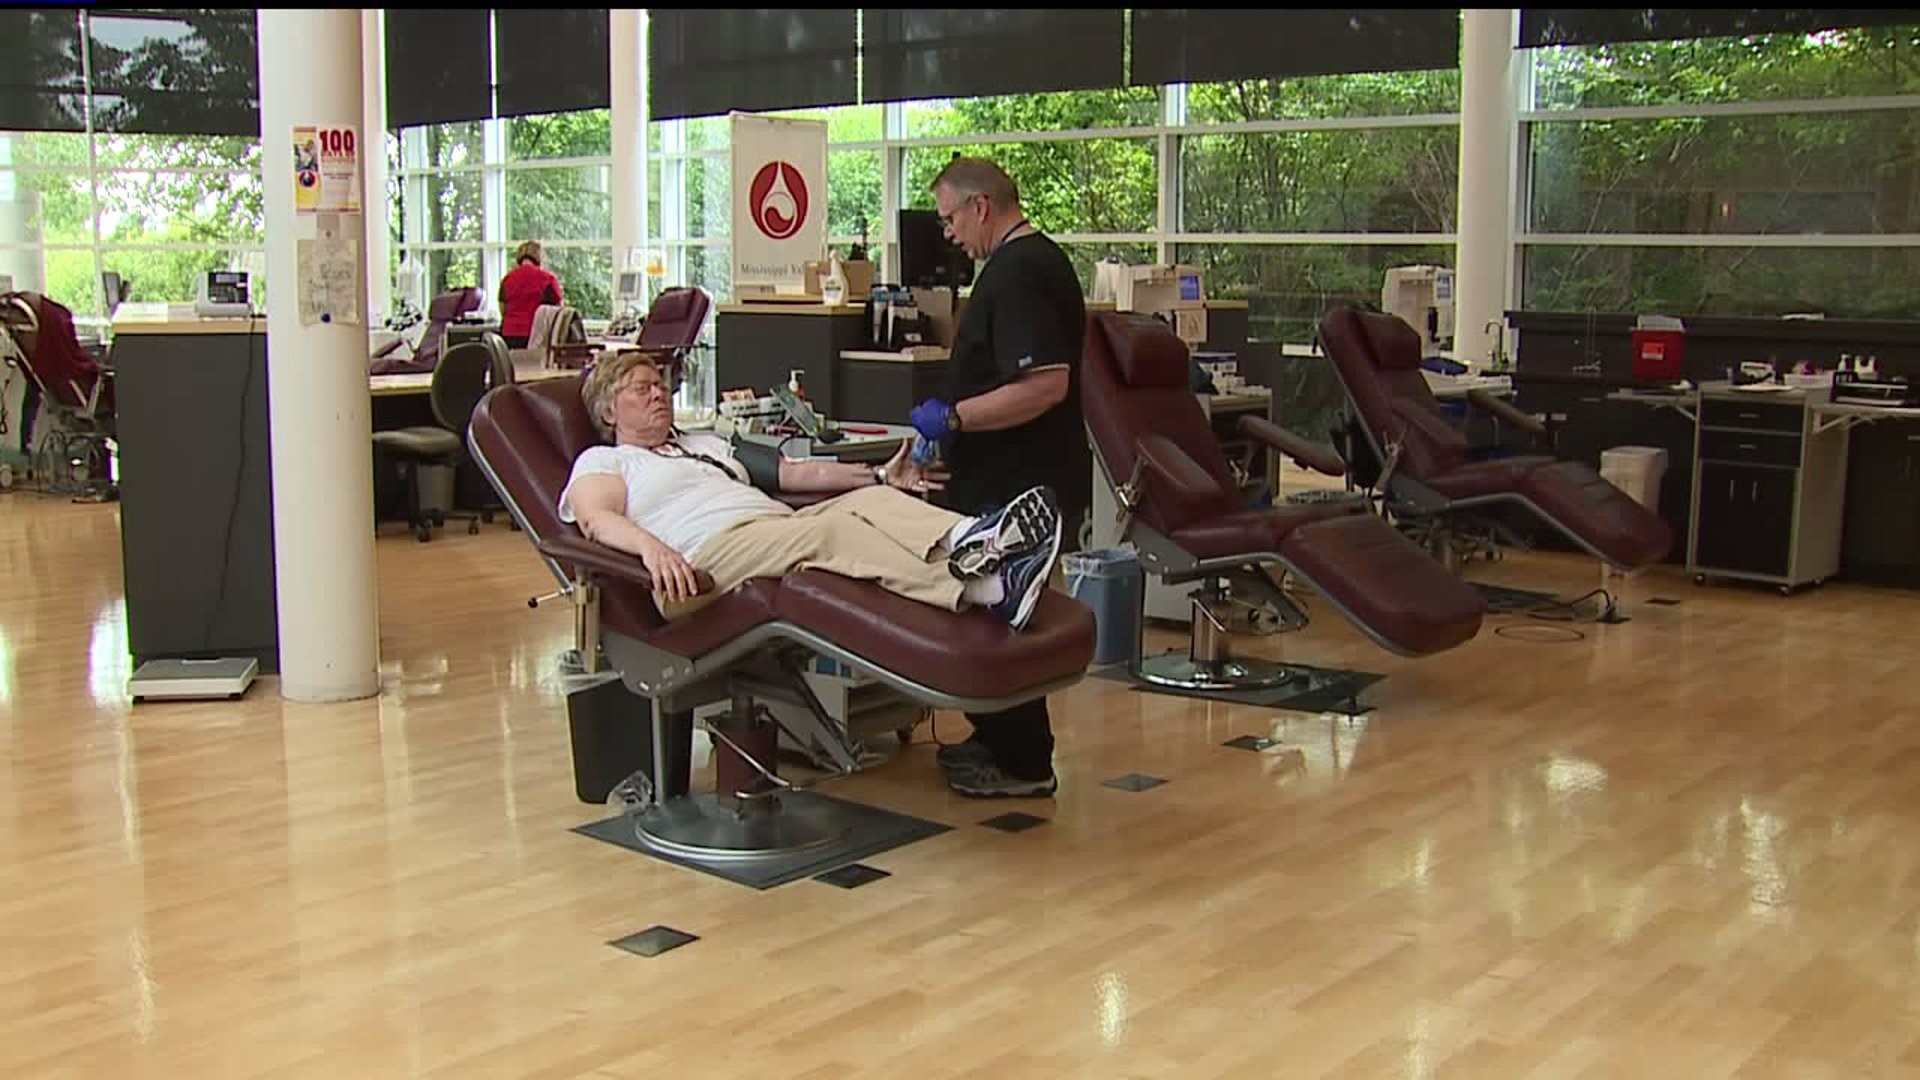 Local blood center sharing with Hawaii